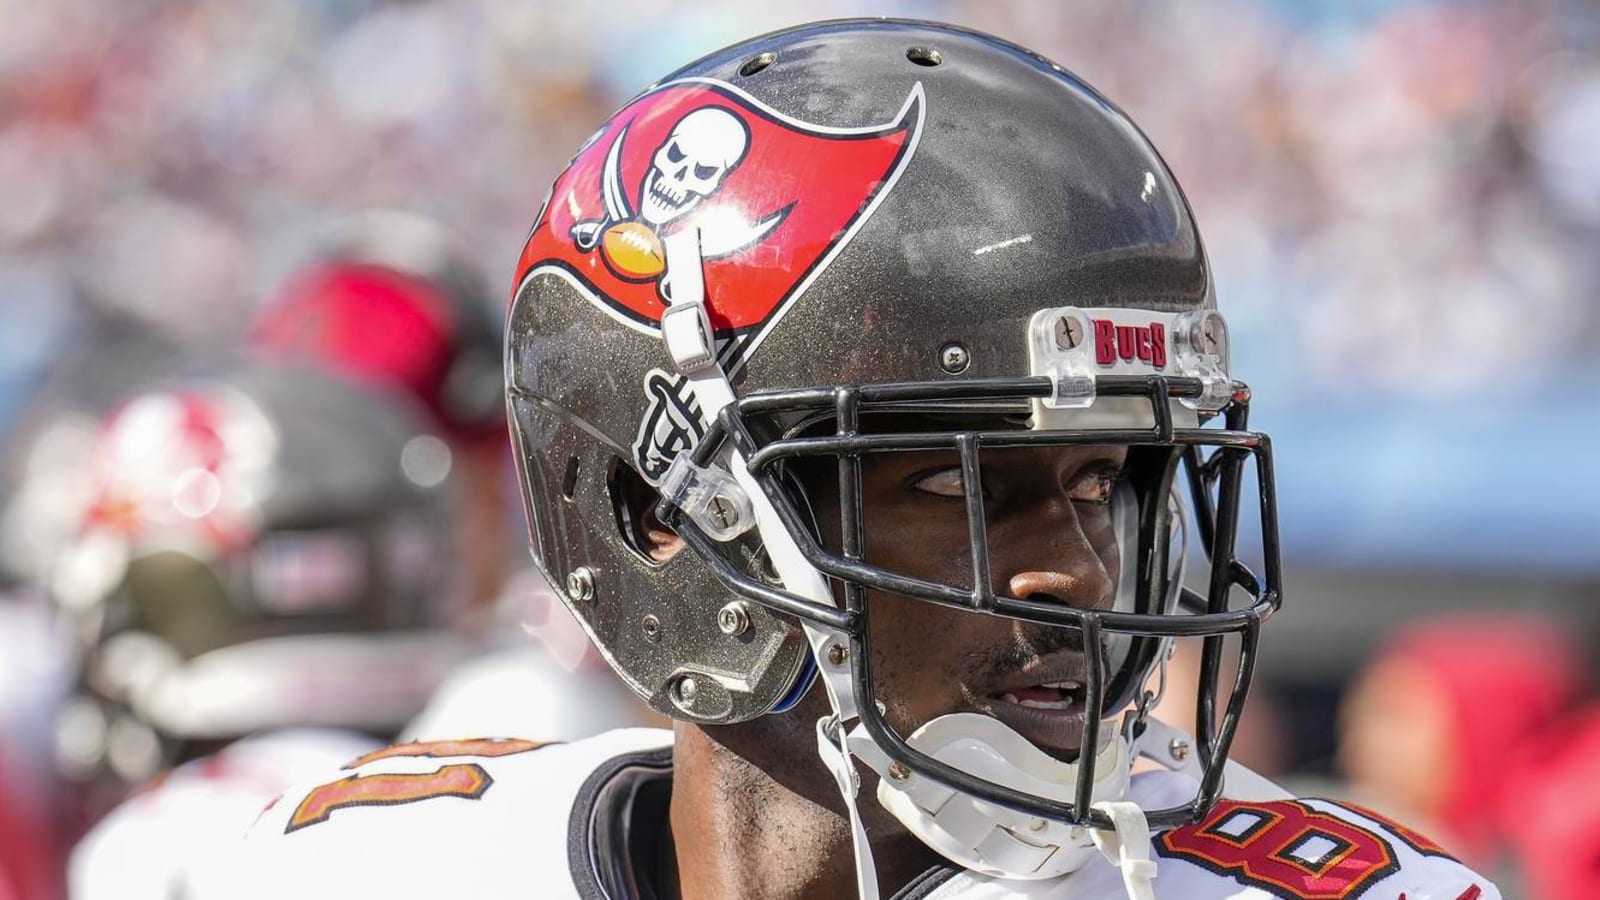 Bucs haven't released WR Antonio Brown after dramatic exit